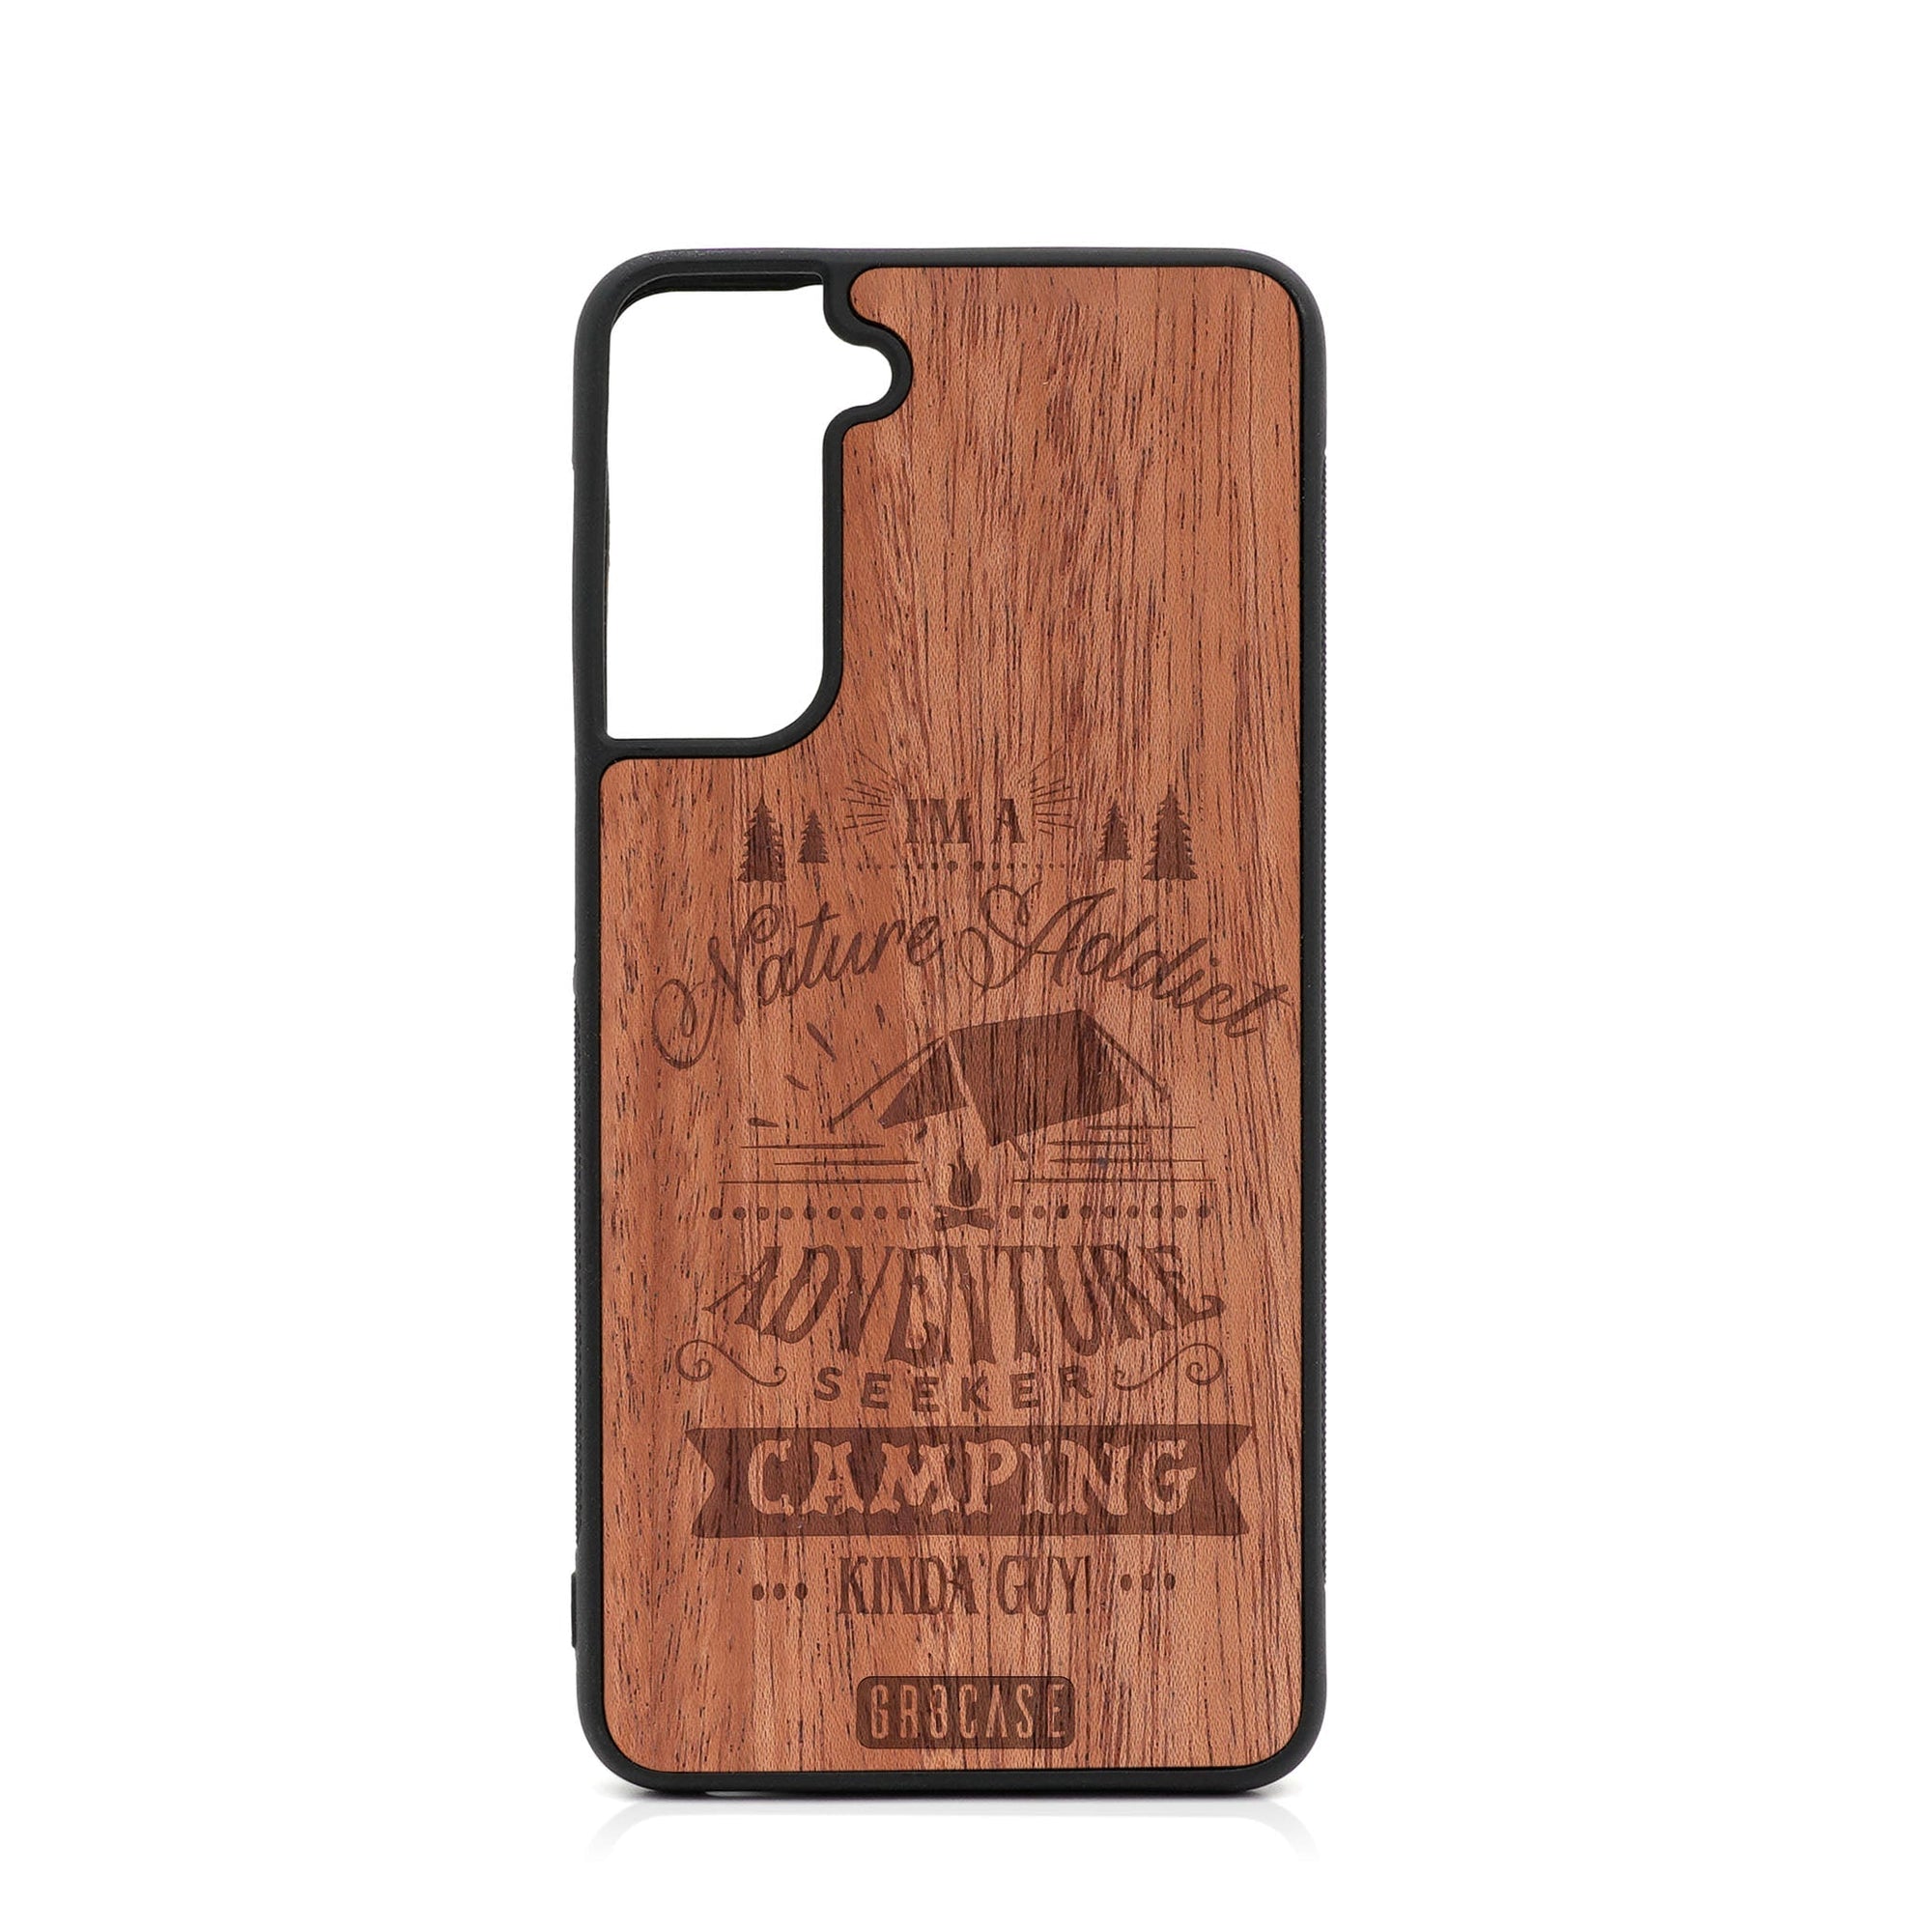 I'm A Nature Addict Adventure Seeker Camping Kinda Guy Design Wood Case For Samsung Galaxy S23 Plus